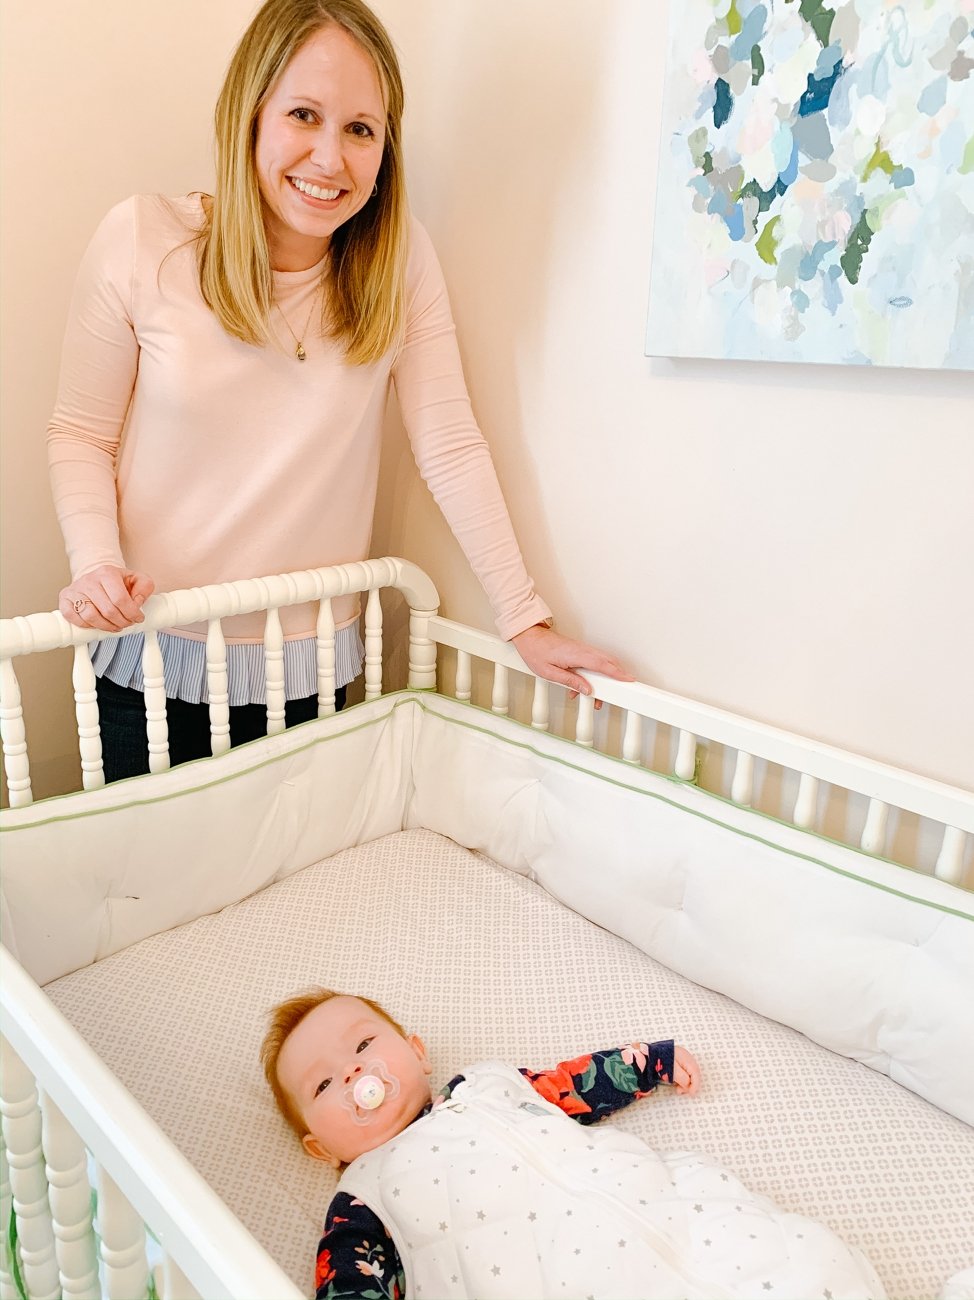 A Certified Sleep Consultant Answers All Your Baby Sleep Questions | Dreamland Baby